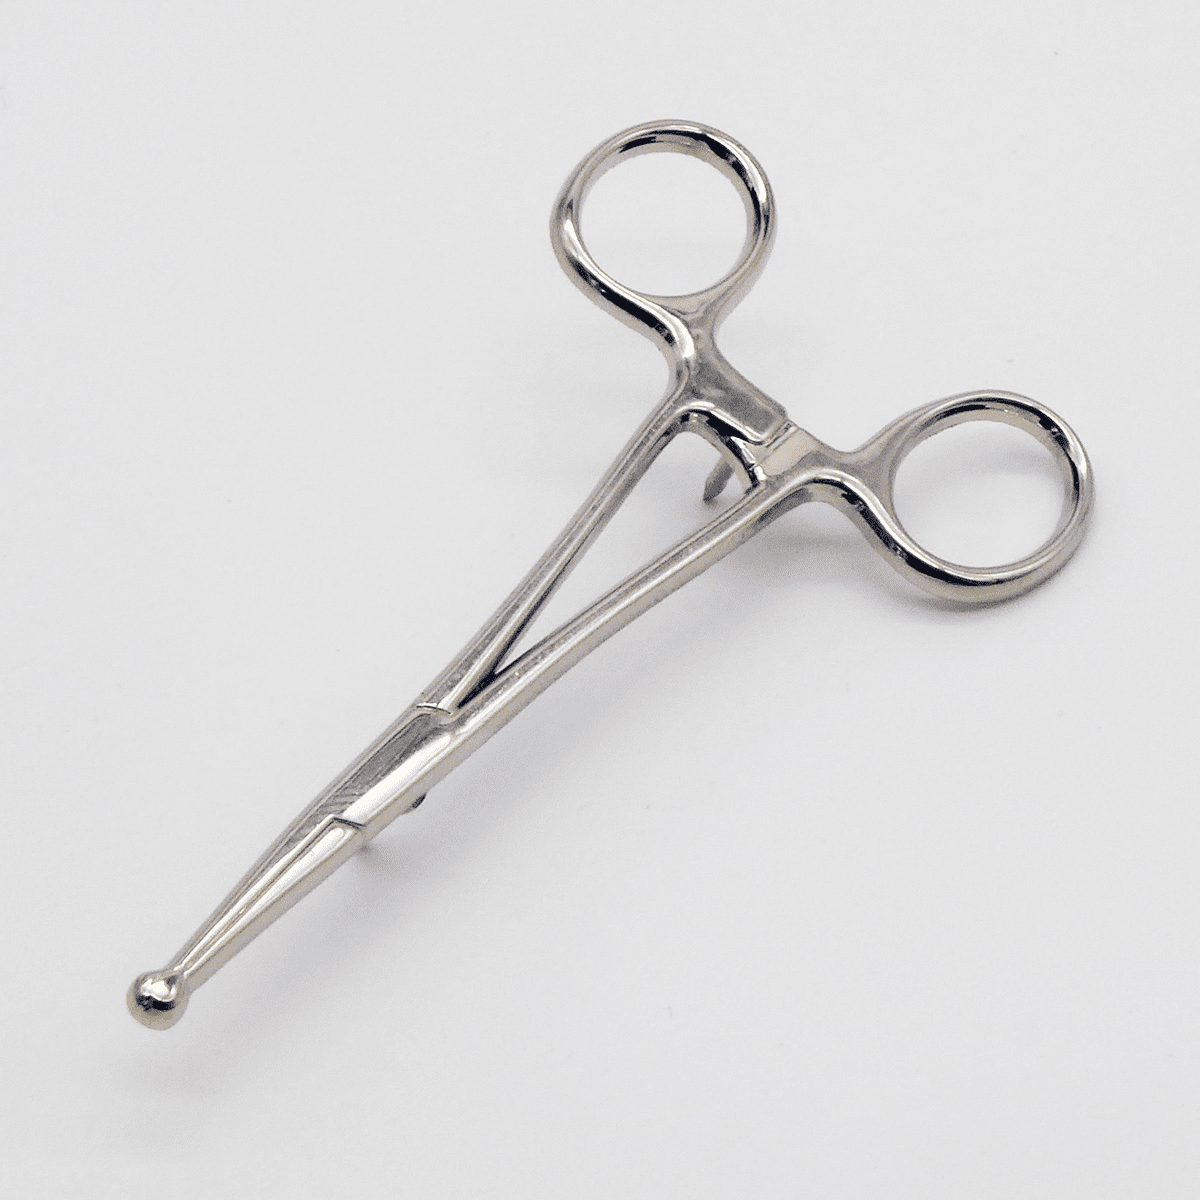 The Vasectomy Pin